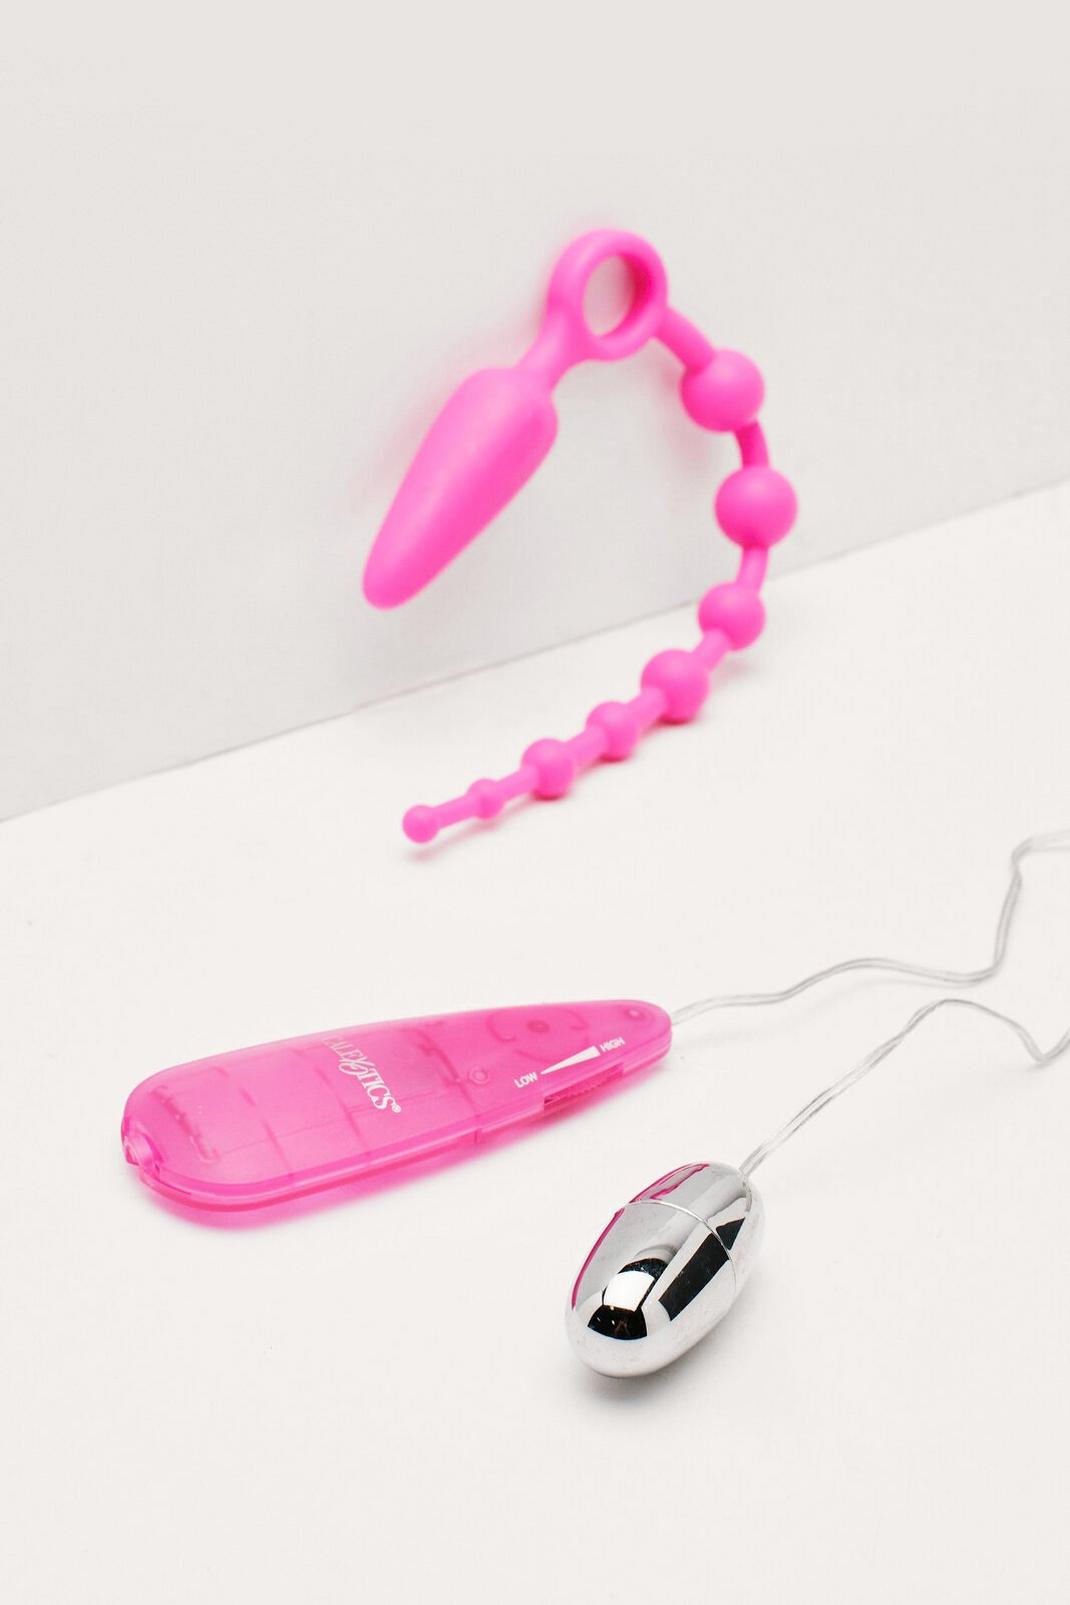 Creative Kink Toys by sex blogger Violet Fawkes